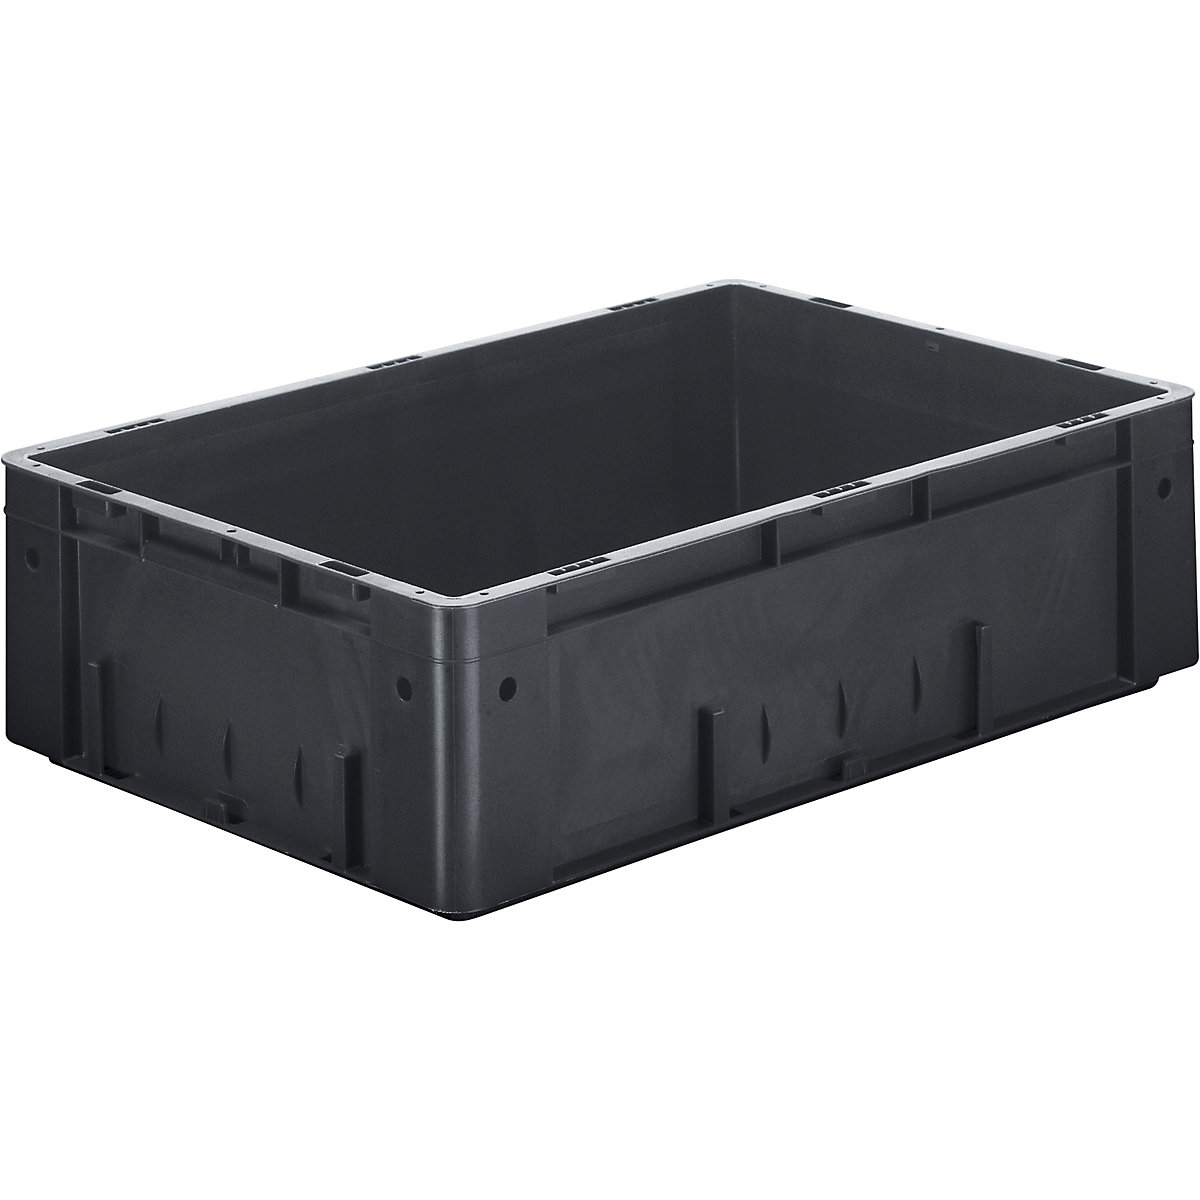 ESD heavy duty EURO-size container, made of polypropylene, LxWxH 600 x 400 x 175 mm, pack of 2-4